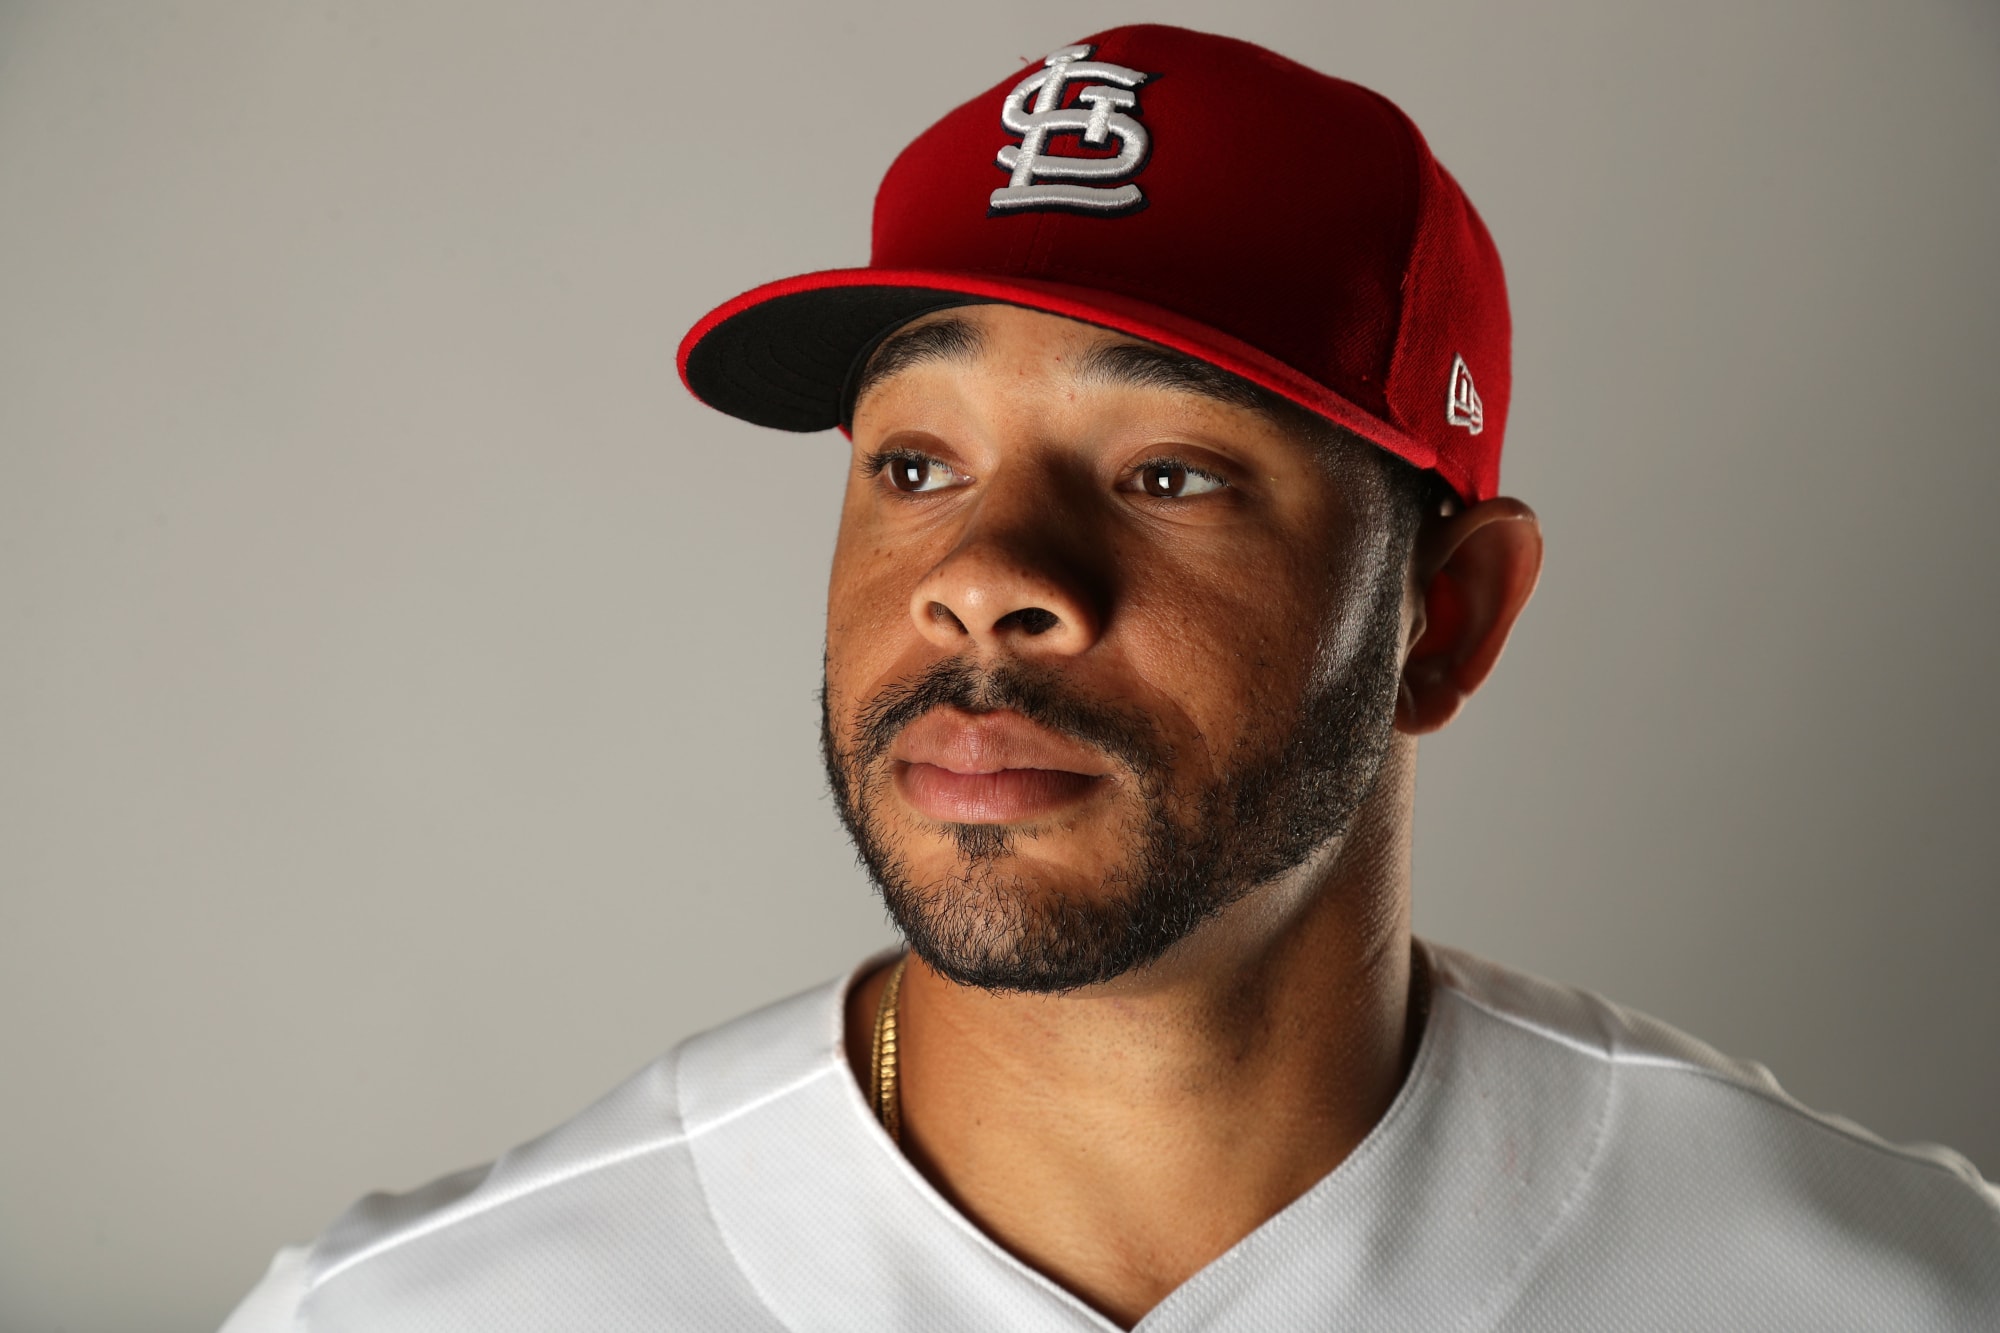 St. Louis Cardinals: Tommy Pham not invited to the party